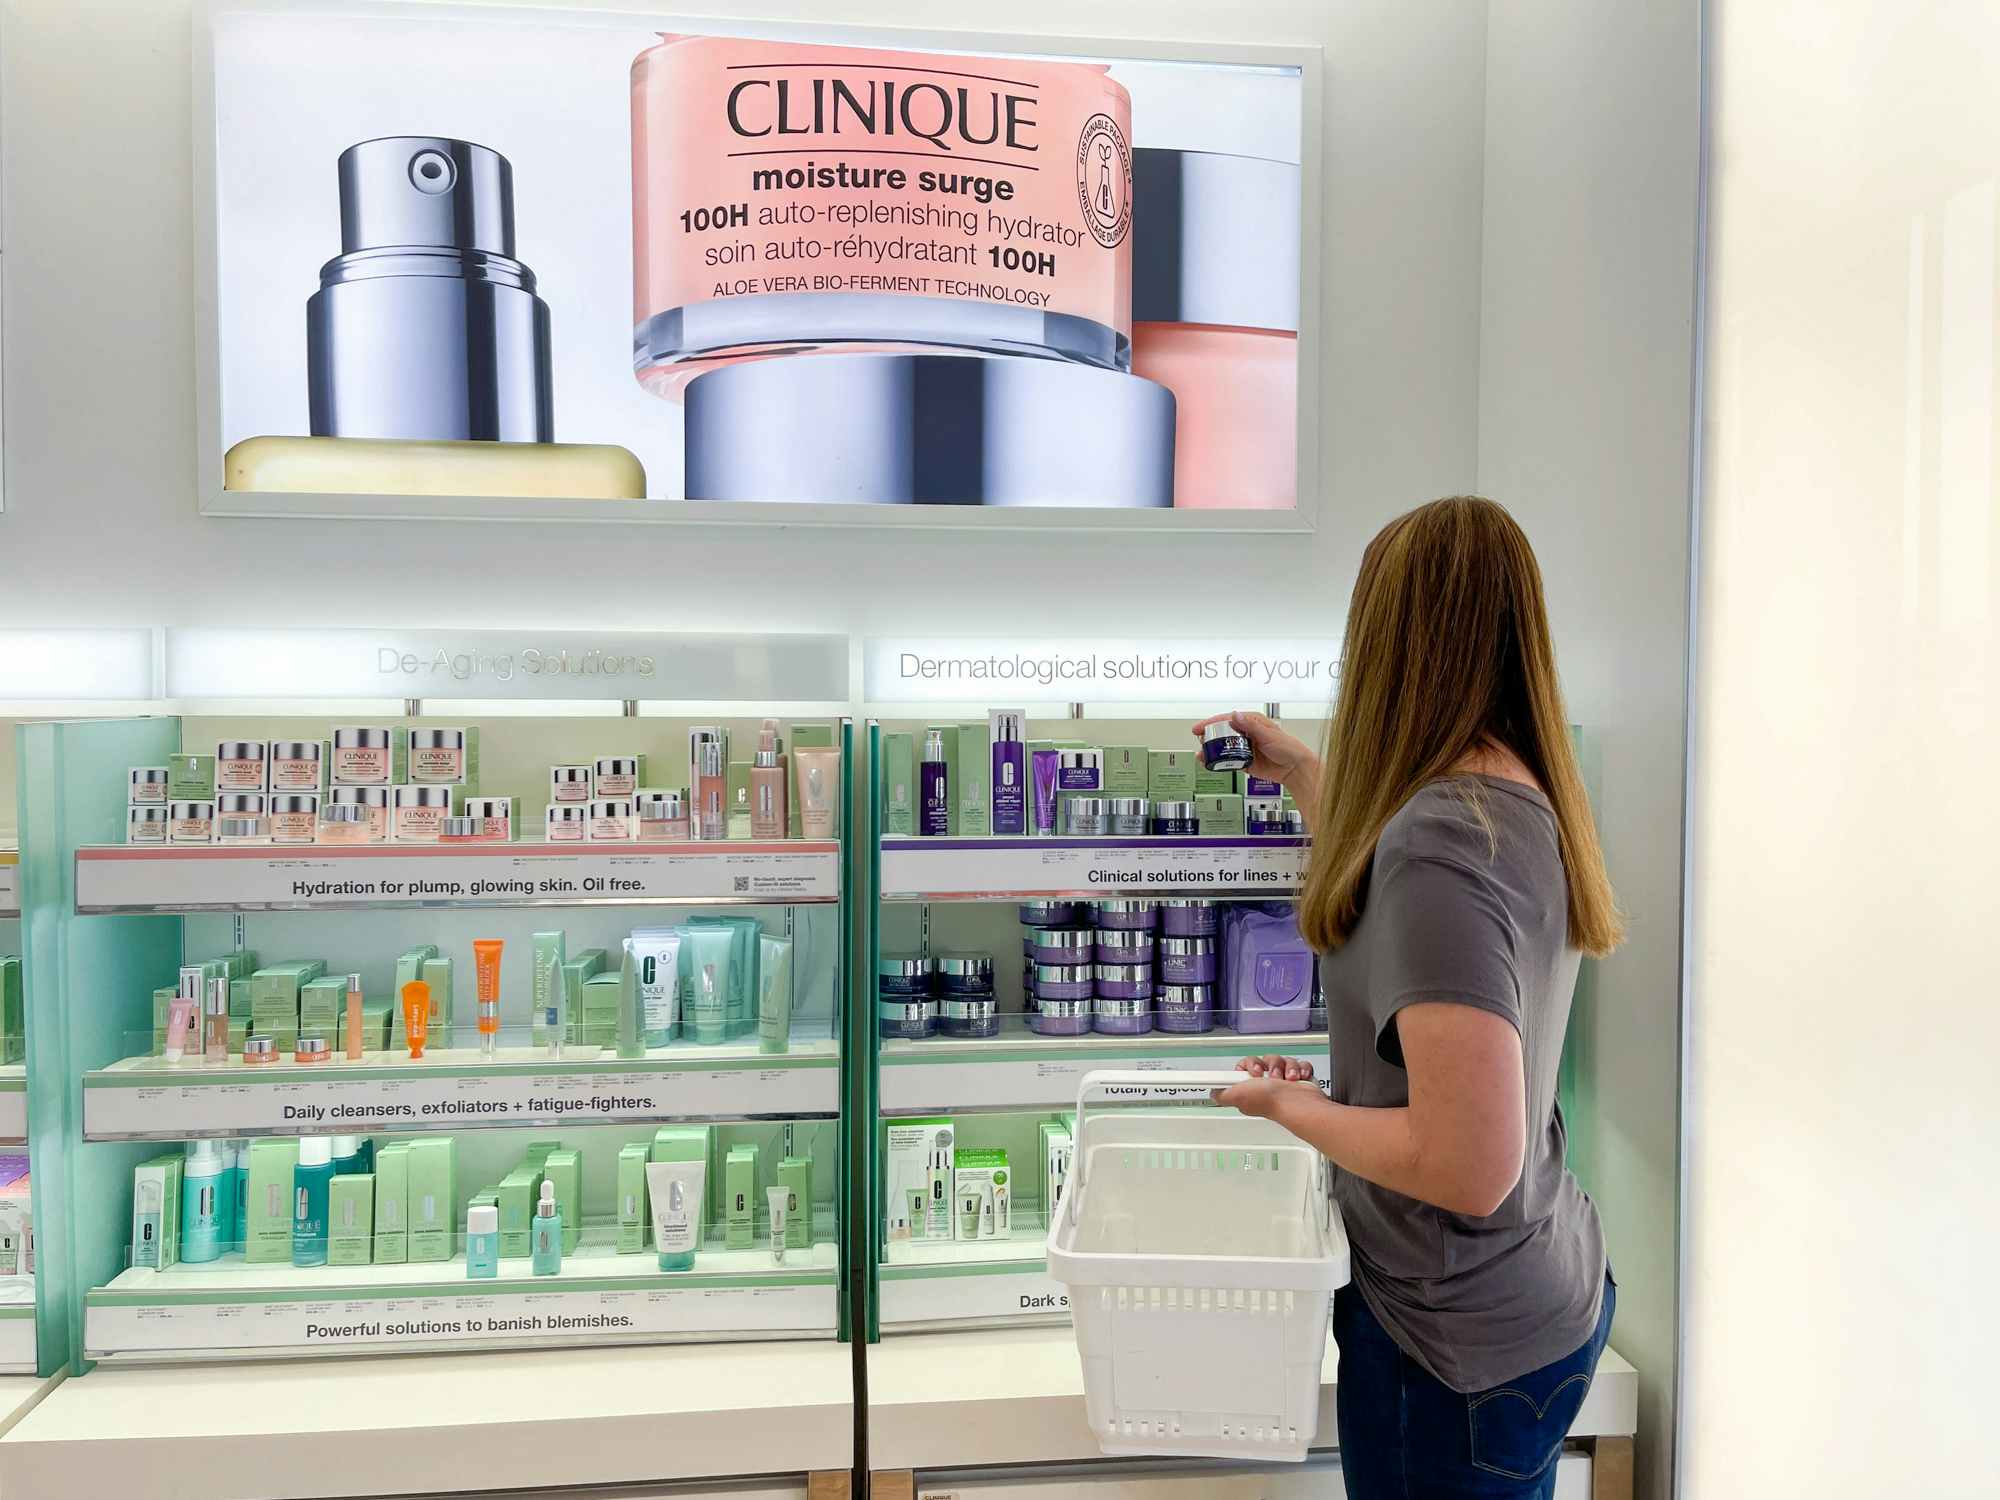 A person shopping the Clinique display at Ulta